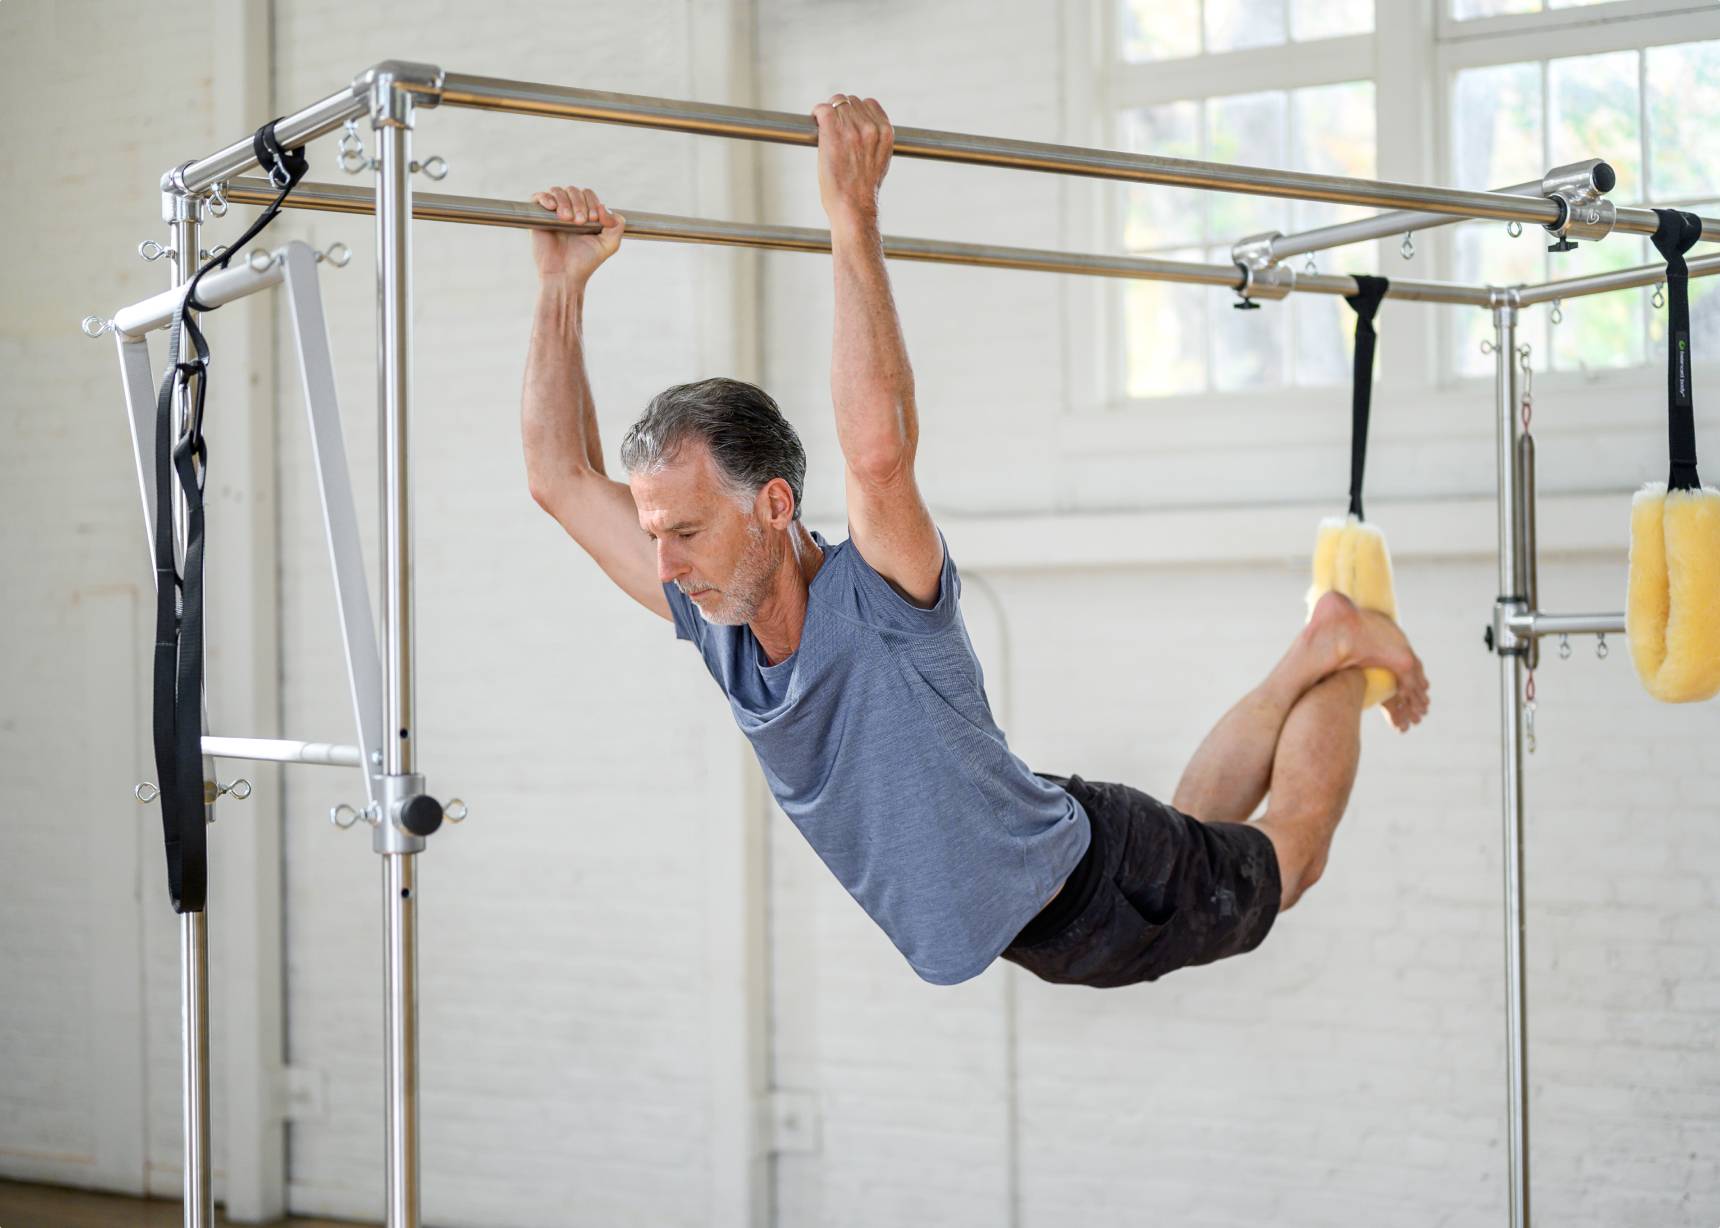 Pilates Workout, Cadillac Trapeze Table, Full Body 45 min